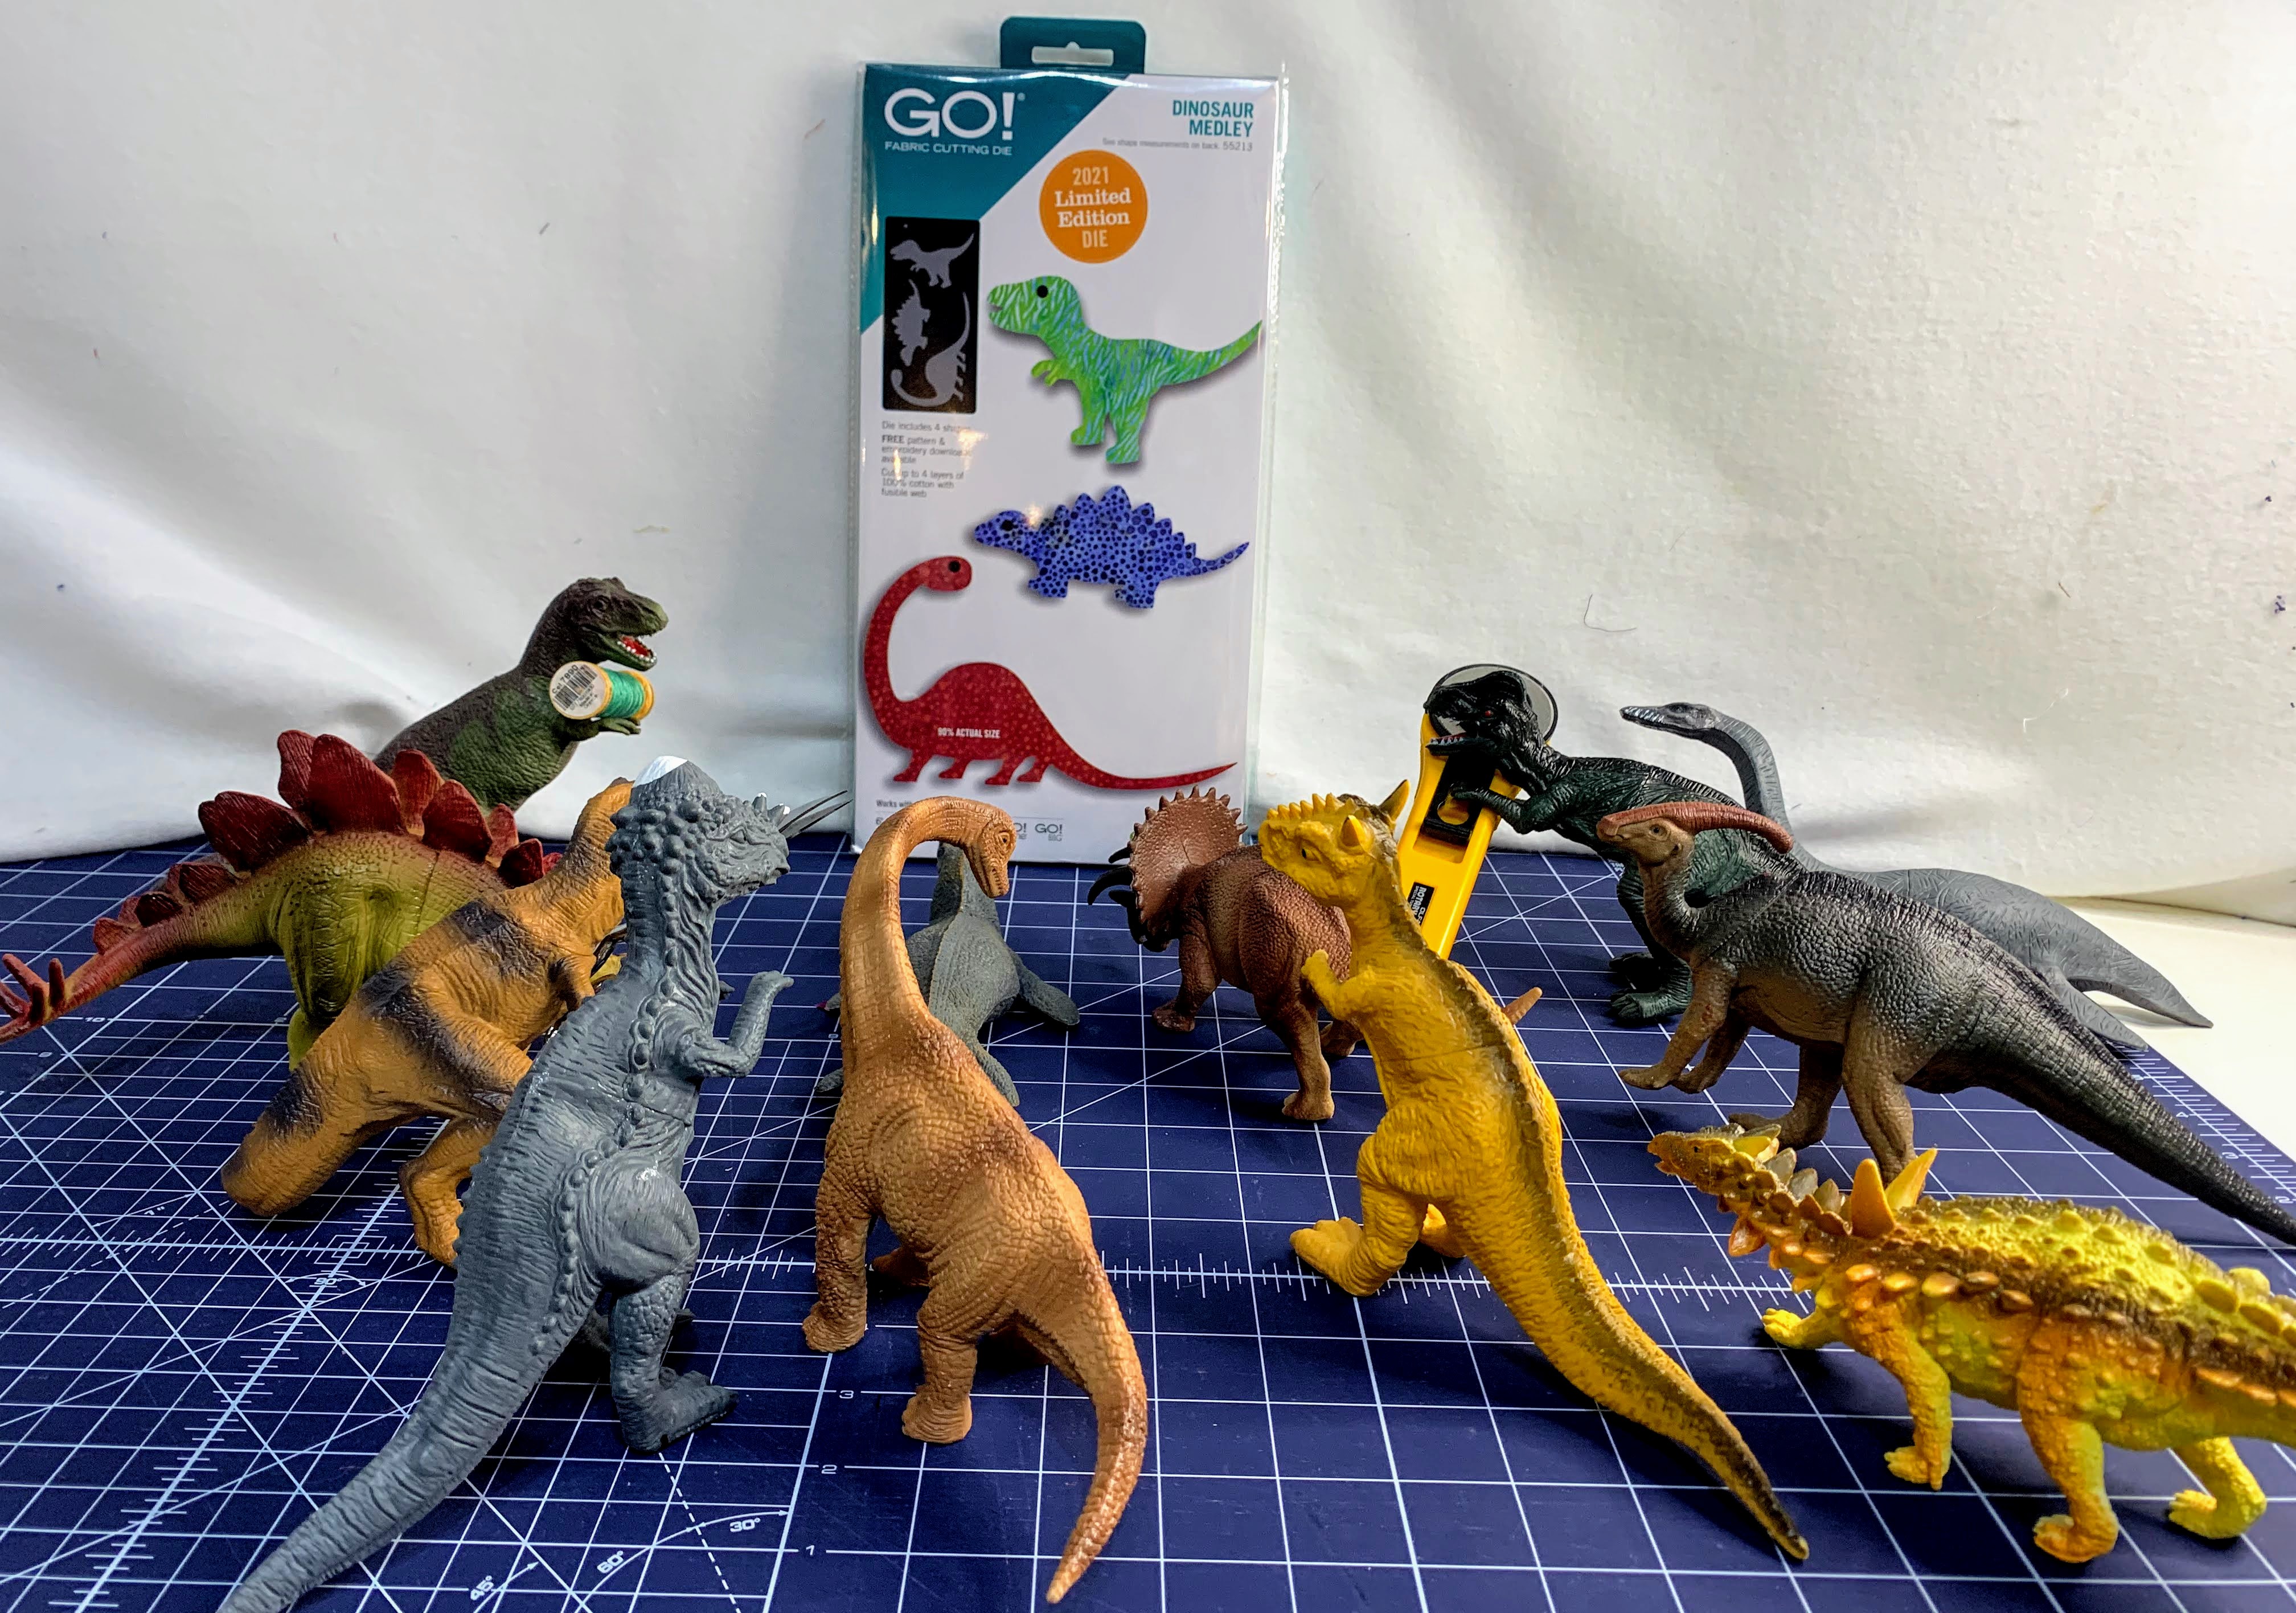 Dinosaurs gather round the new die, dreaming of their own play mat world. 